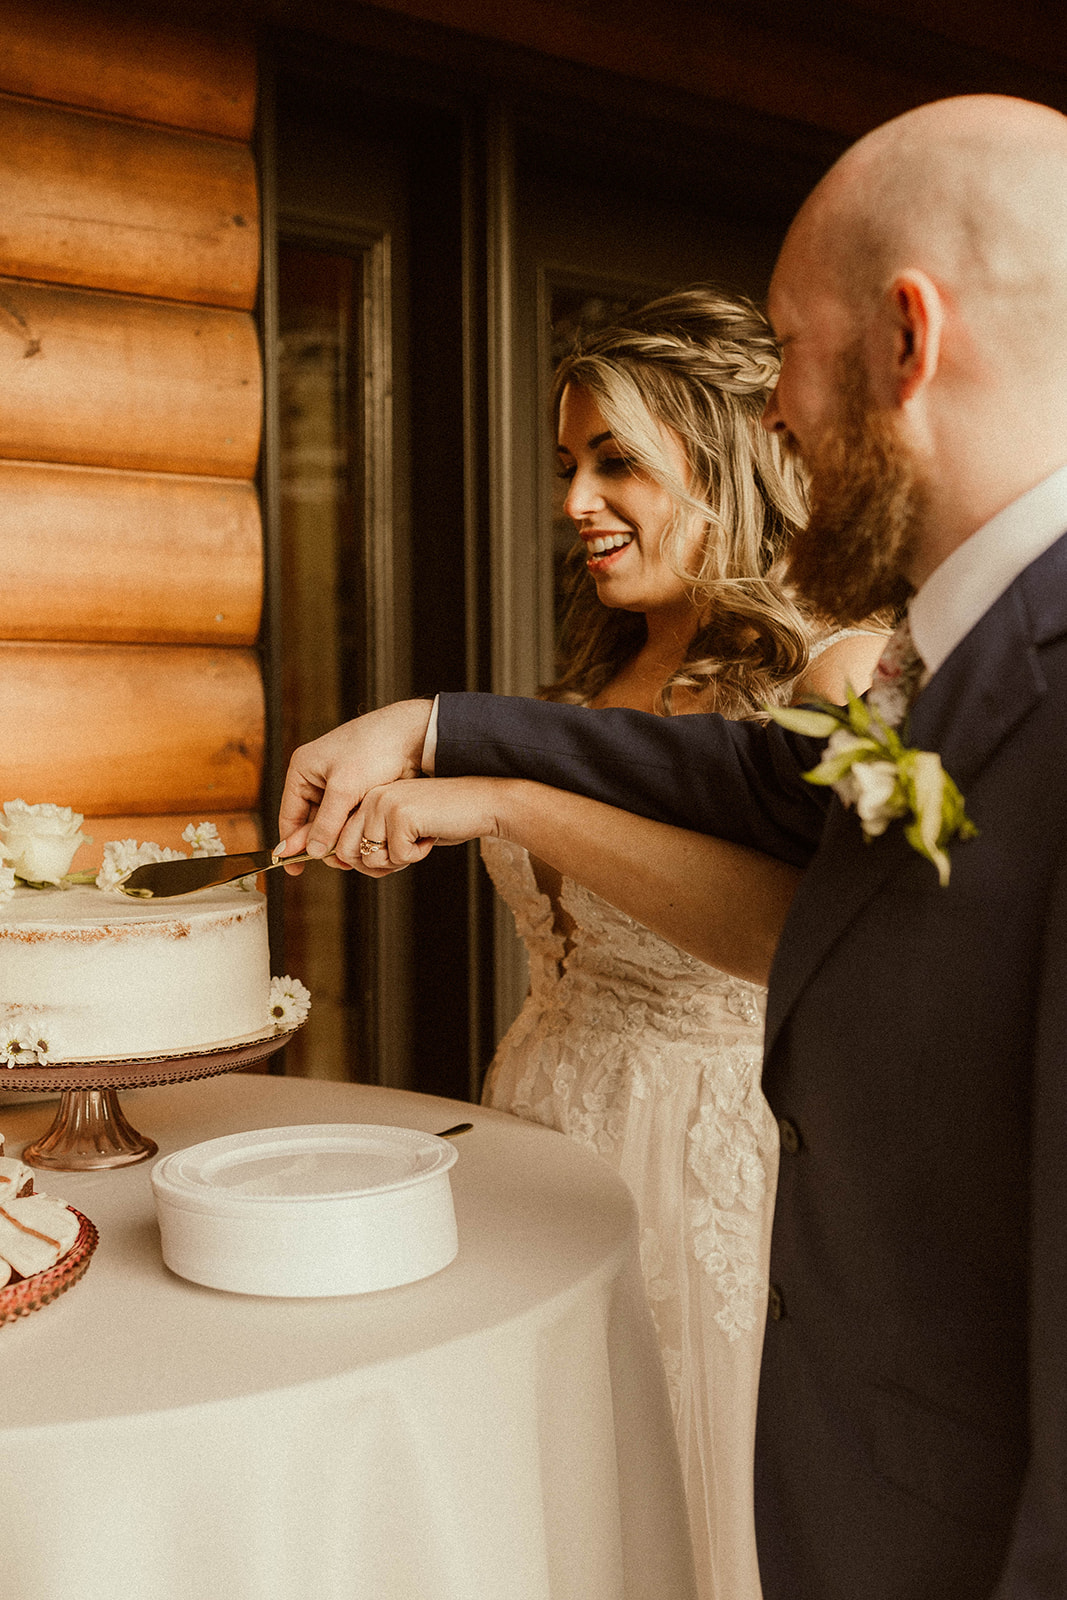 Beautiful bride and groom cut their wedding cake at EBS view lodge nestled in the Adirondack mountains